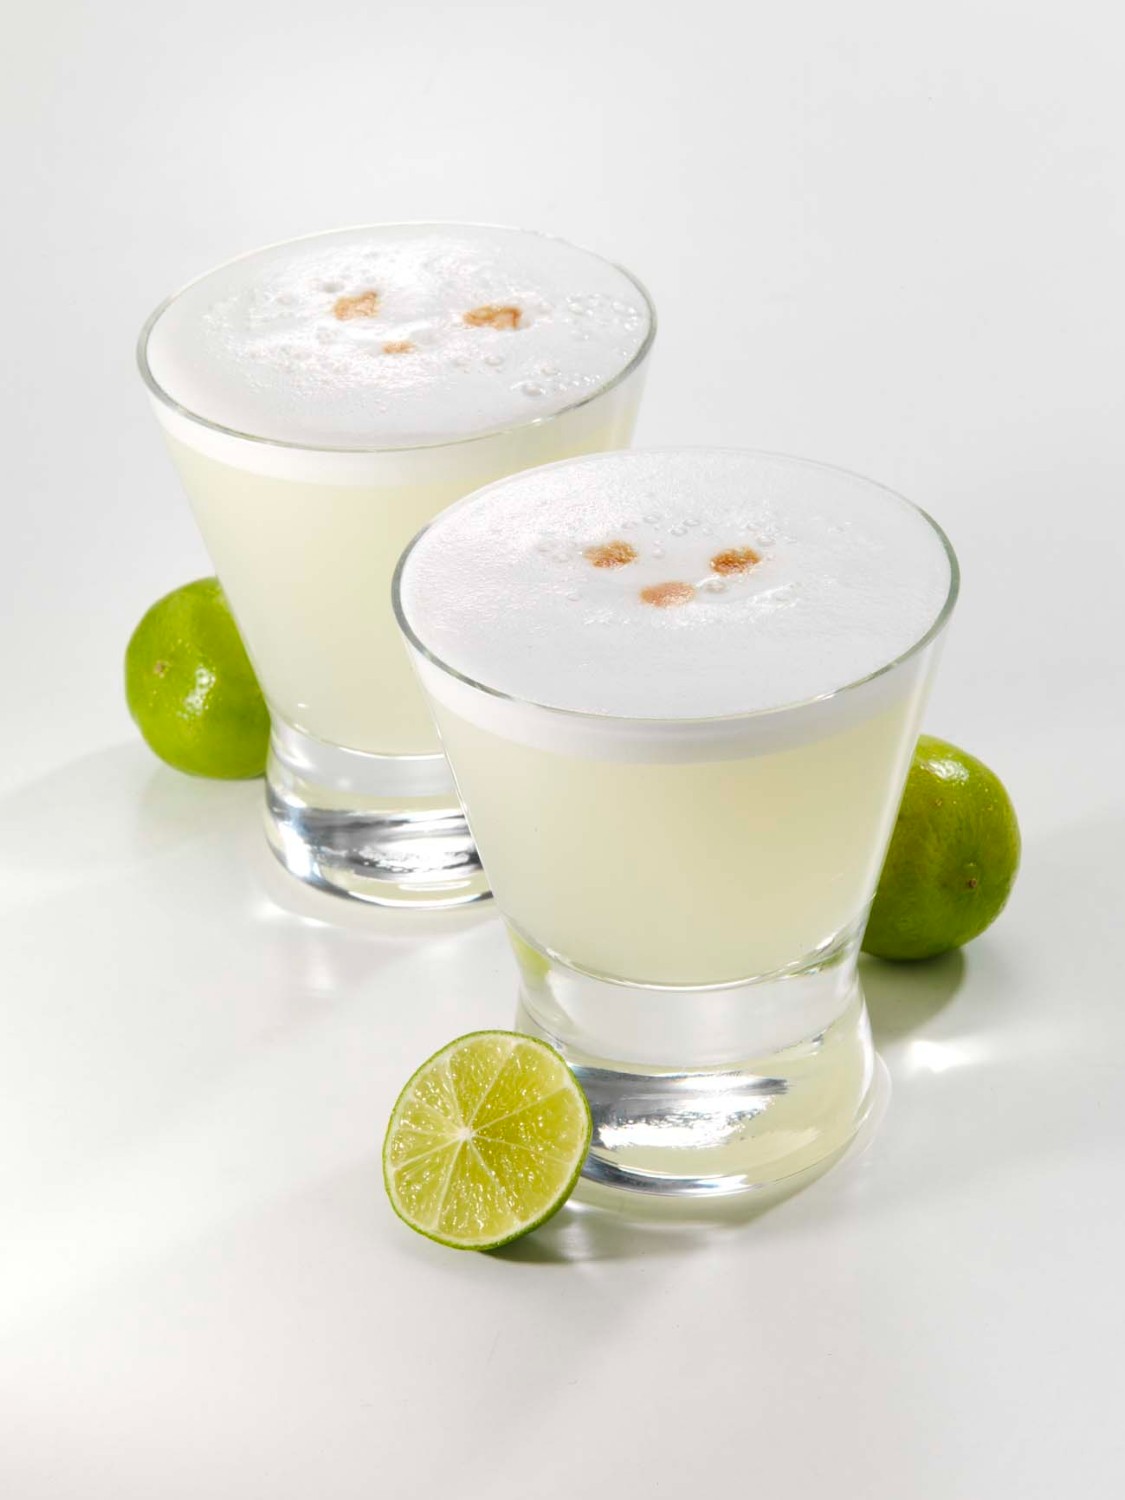 Pisco Sour cocktail from Peru